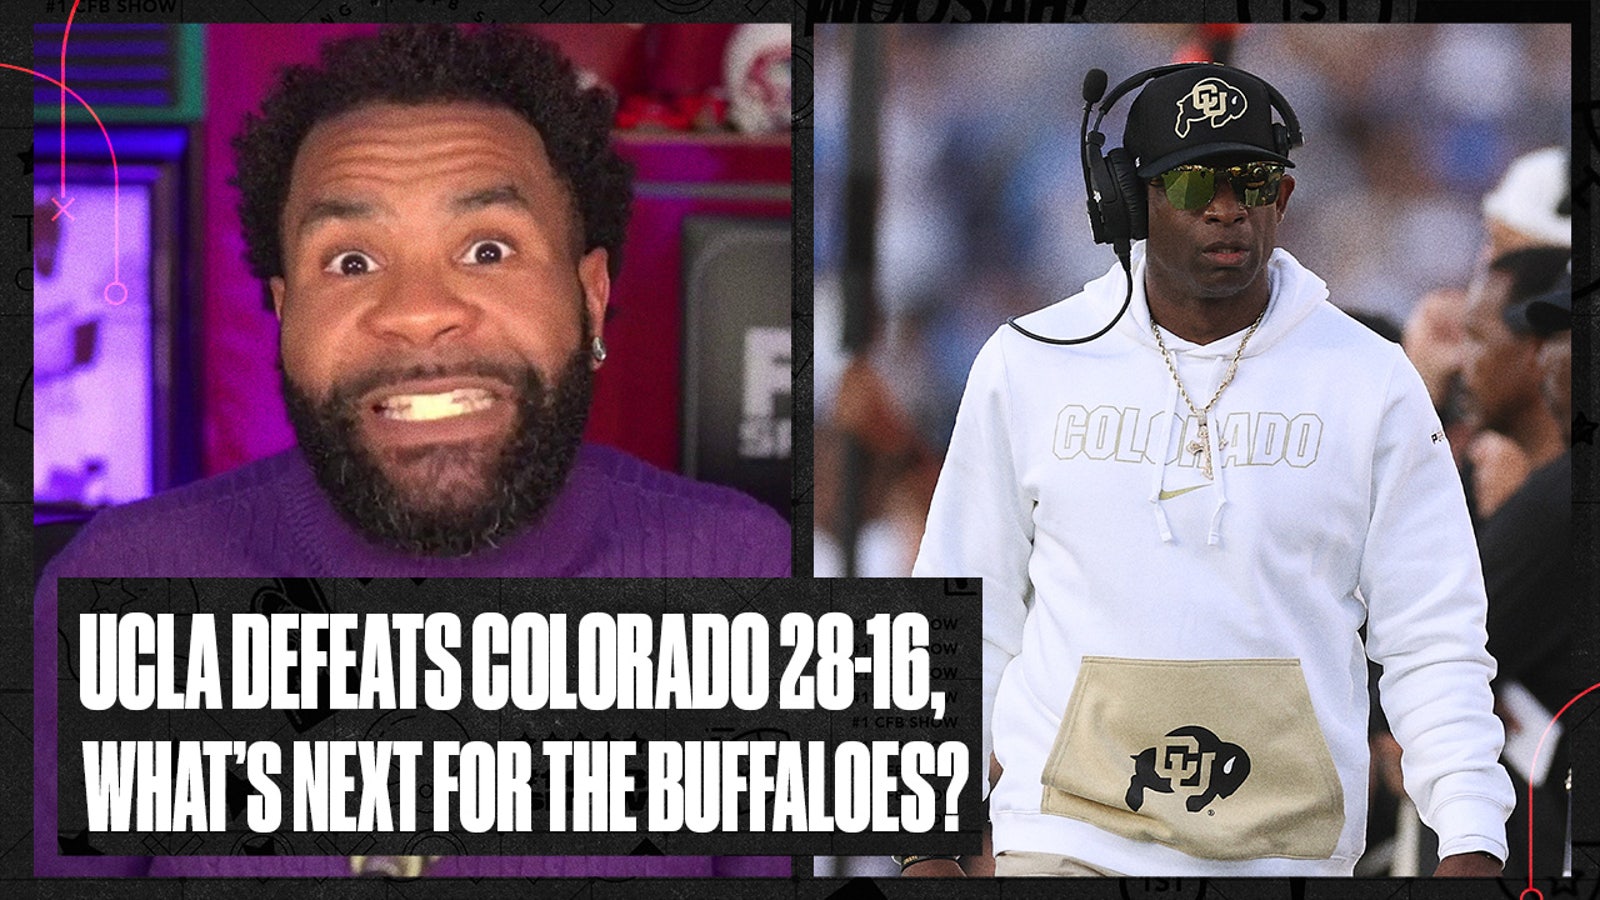 RJ Young discusses what's next for the Colorado Buffaloes